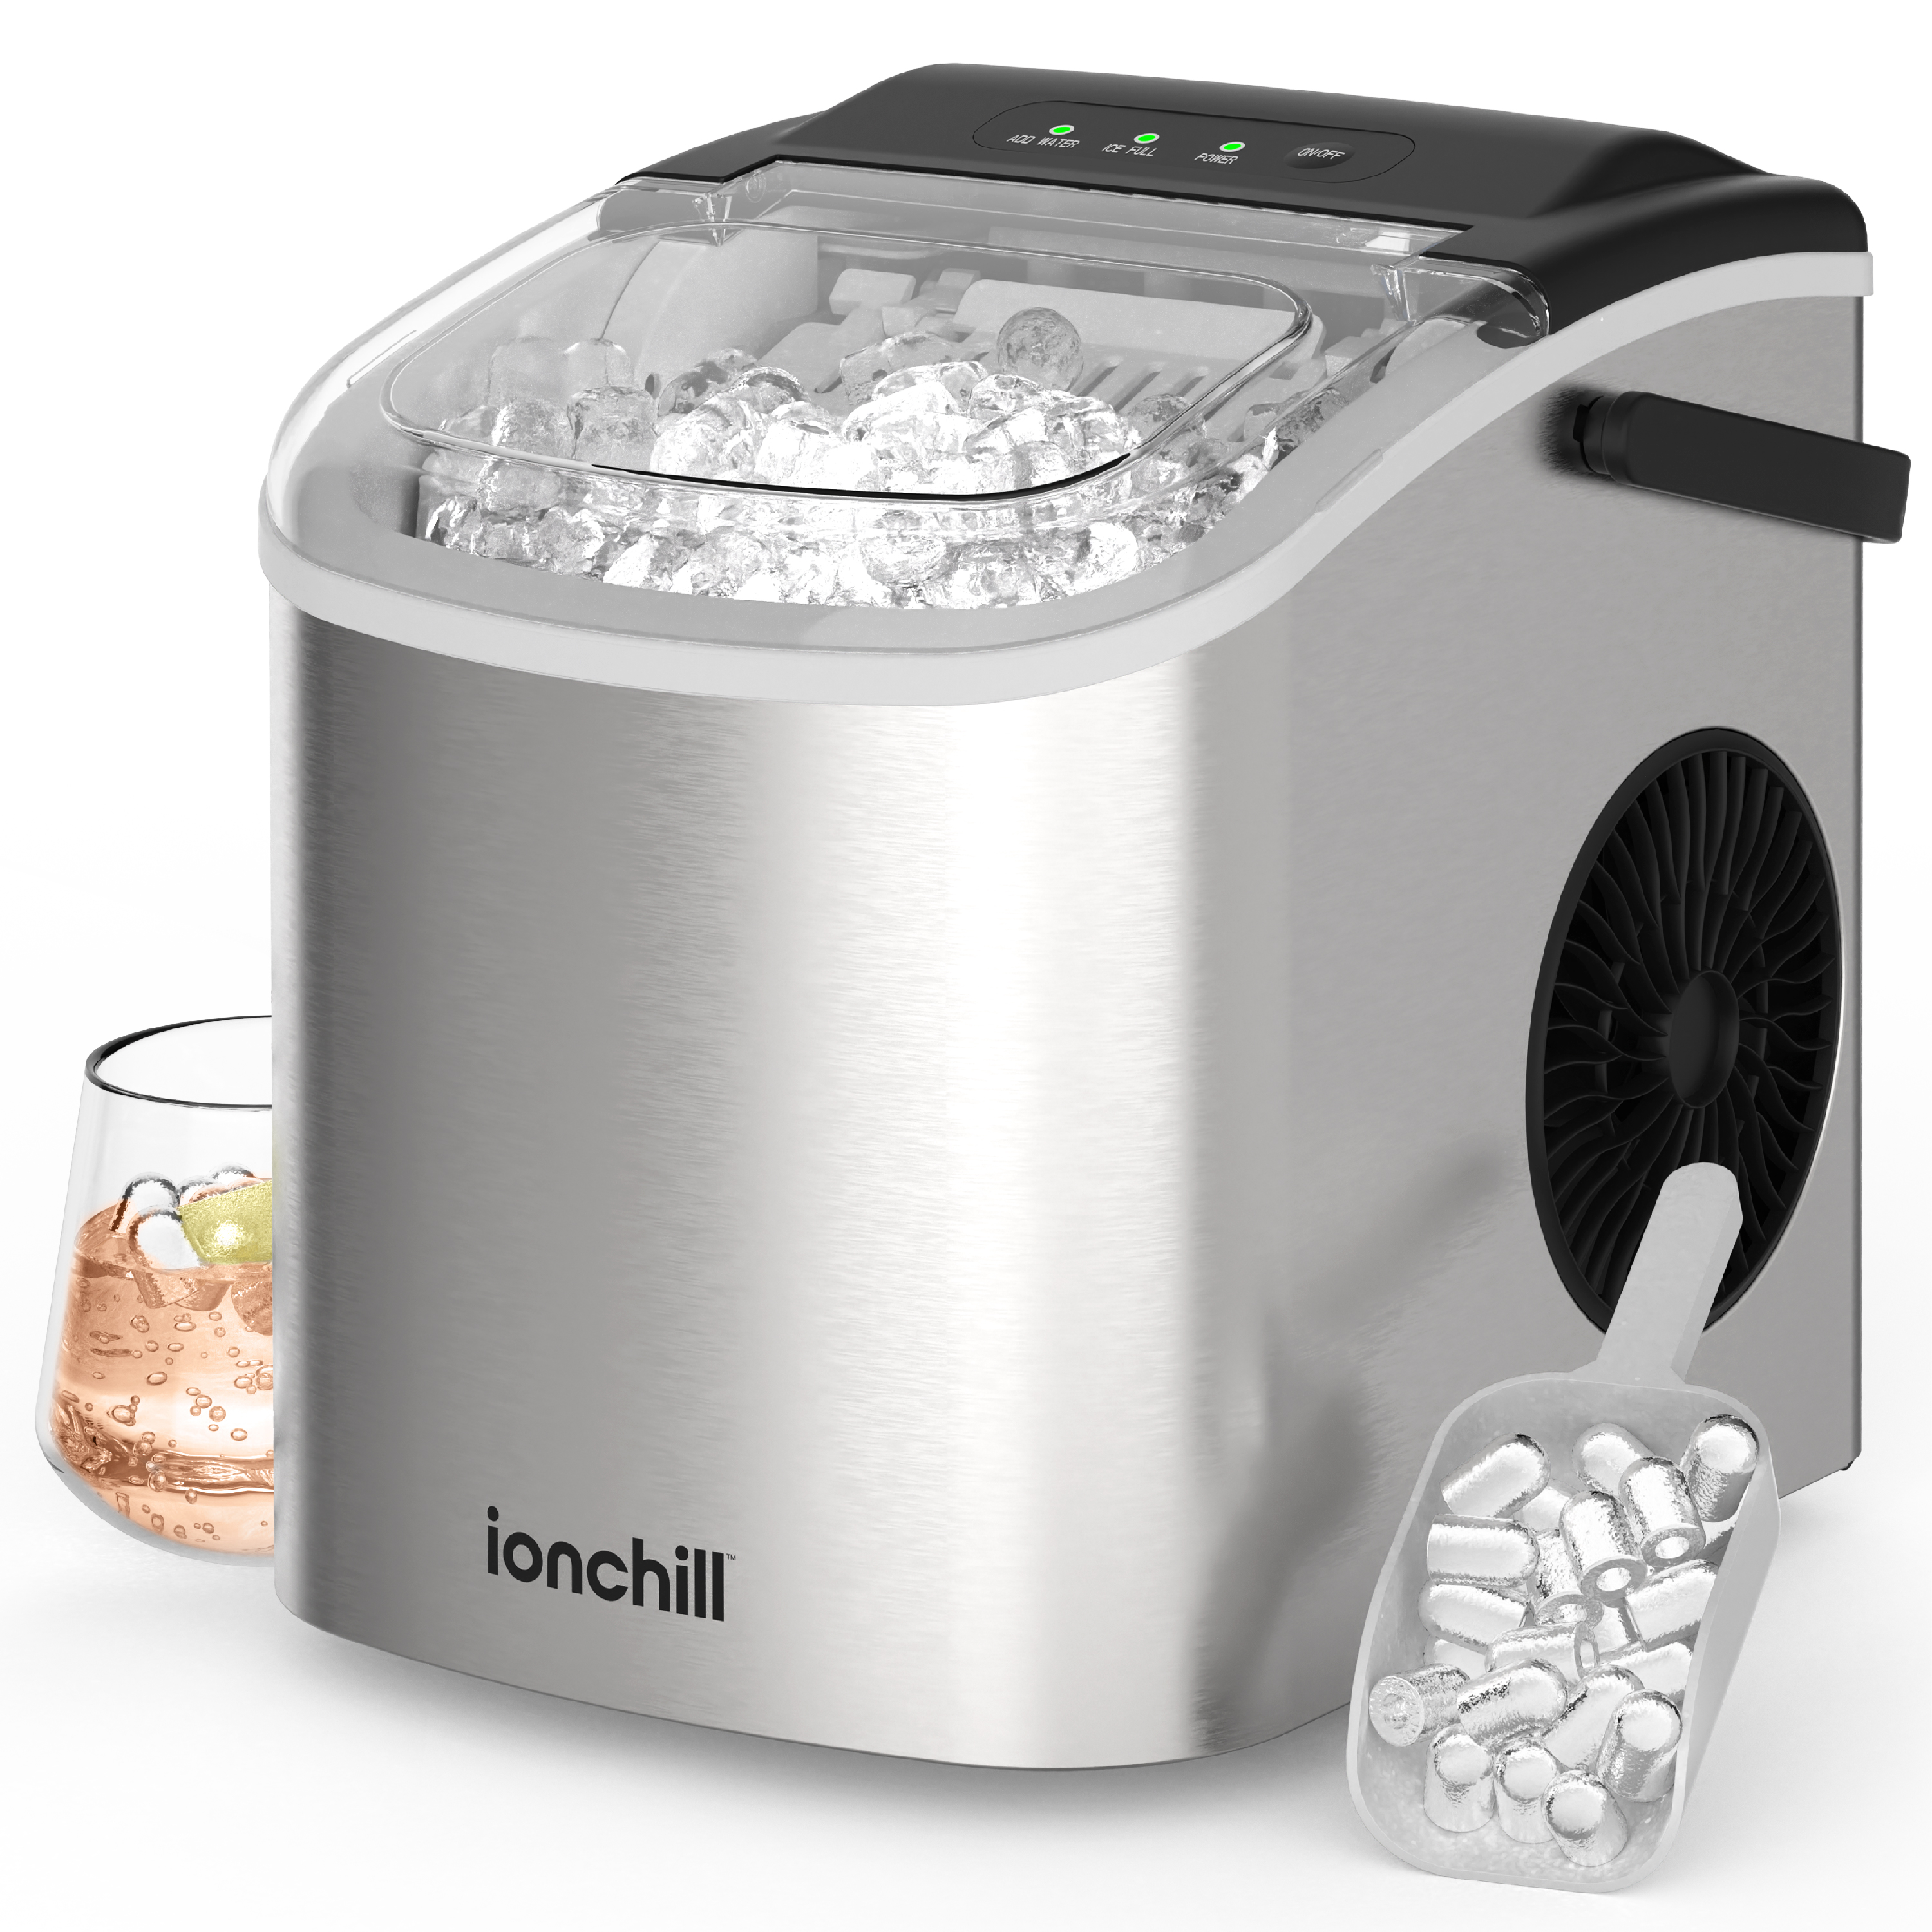 Ionchill Quick Cube Ice Machine, 26lbs/24hrs Portable Countertop Bullet Cubed Ice Maker - Walmart.com